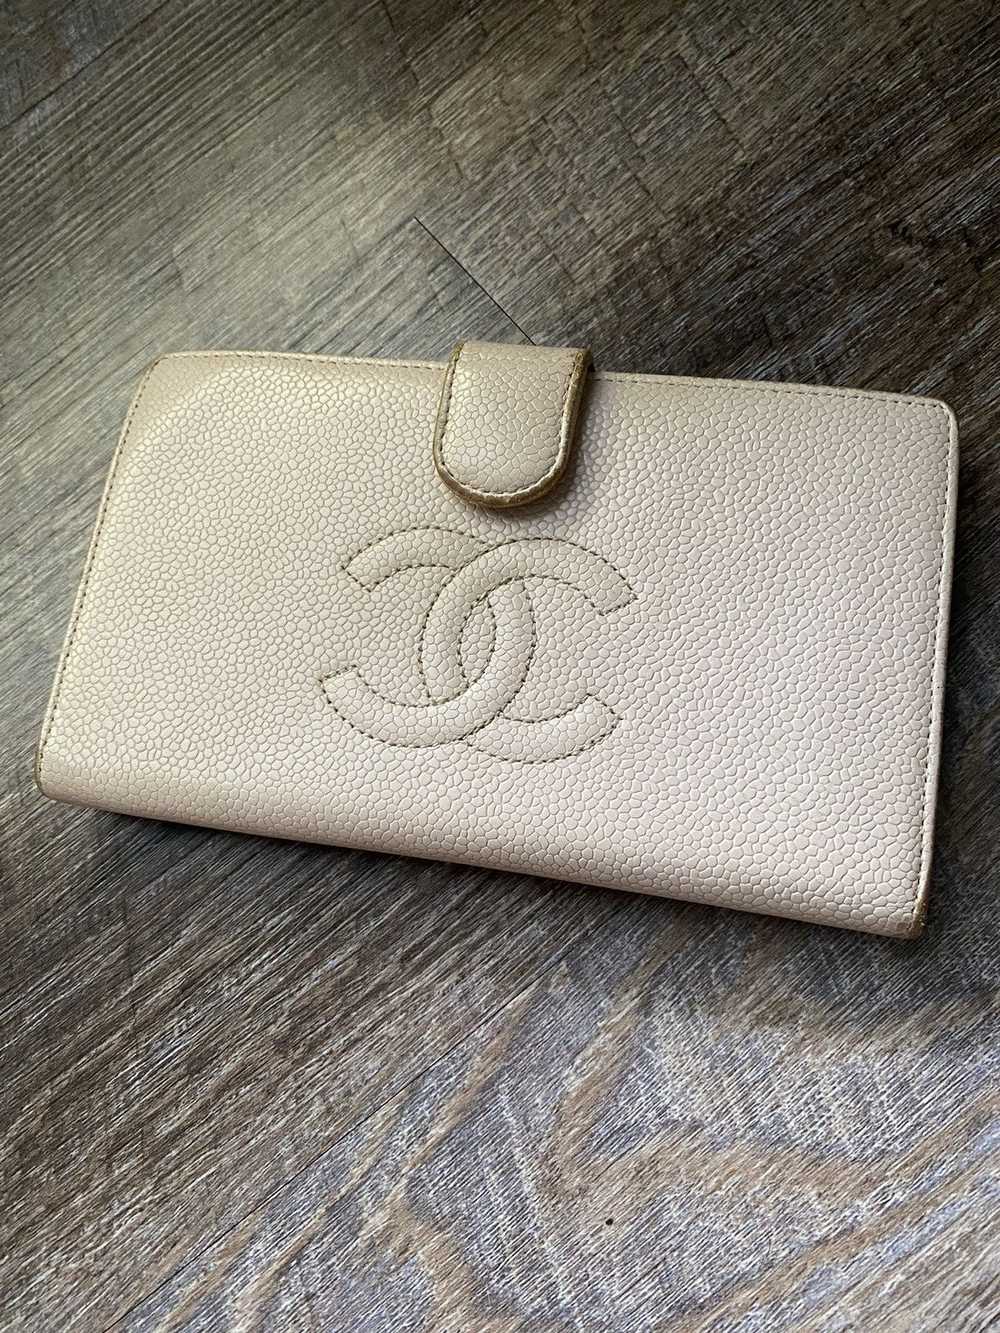 Chanel Chanel CC Caviar leather long wallet - image 2